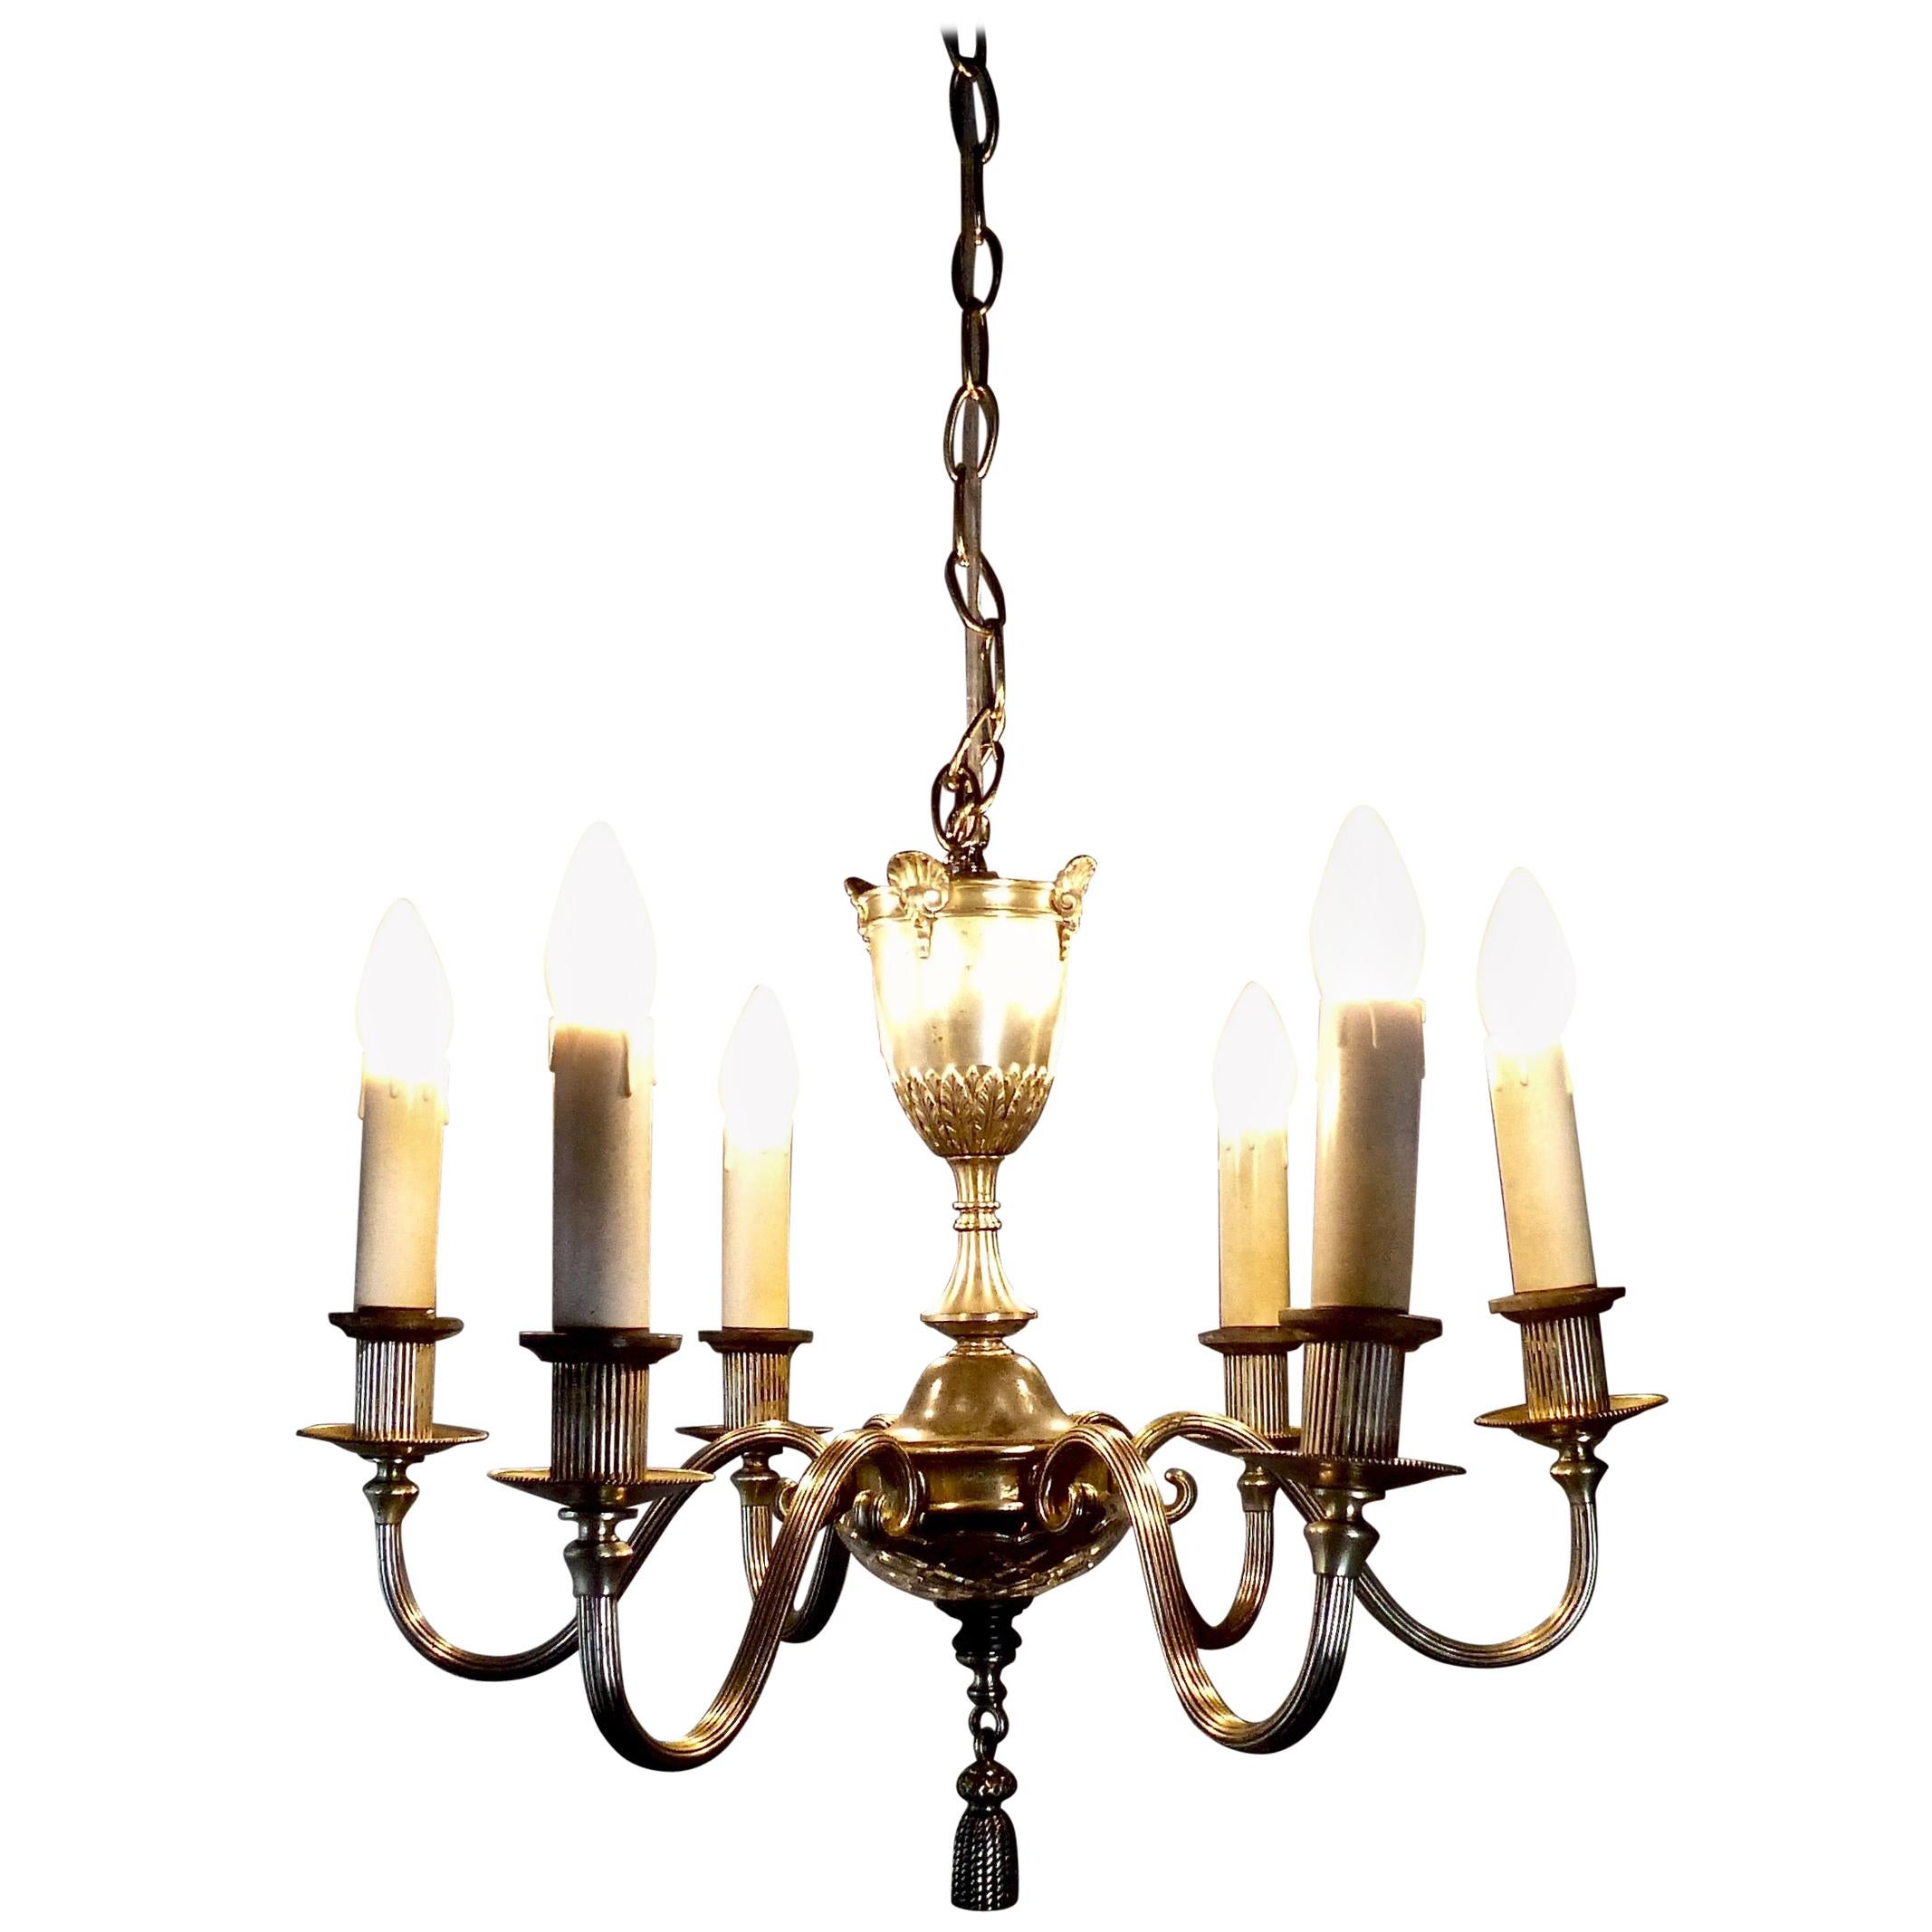 1920s Small Six-Armed Silver Gilt Chandelier